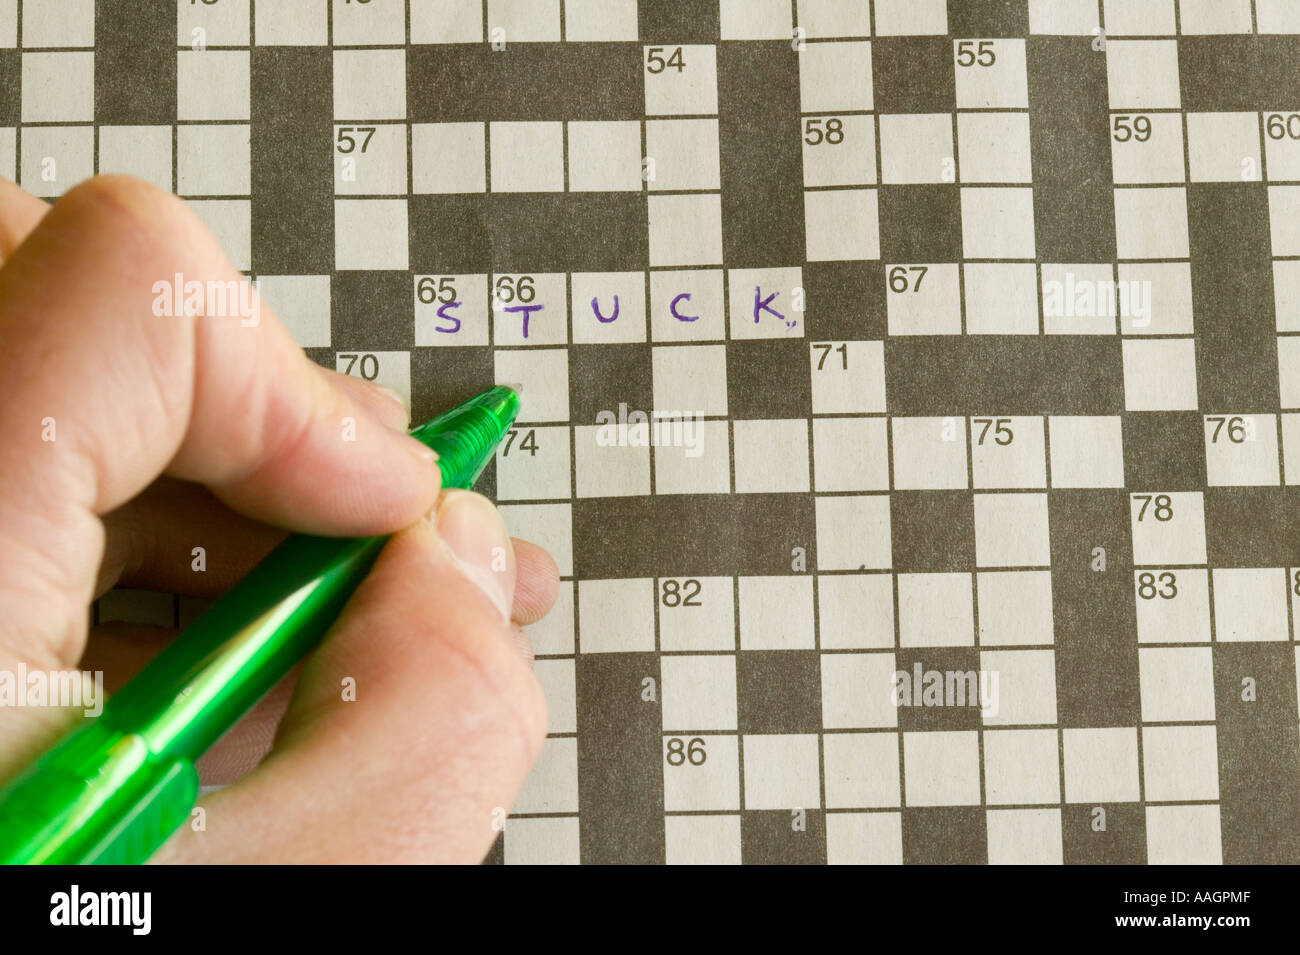 Crossword Clues High Resolution Stock Photography and Images Alamy